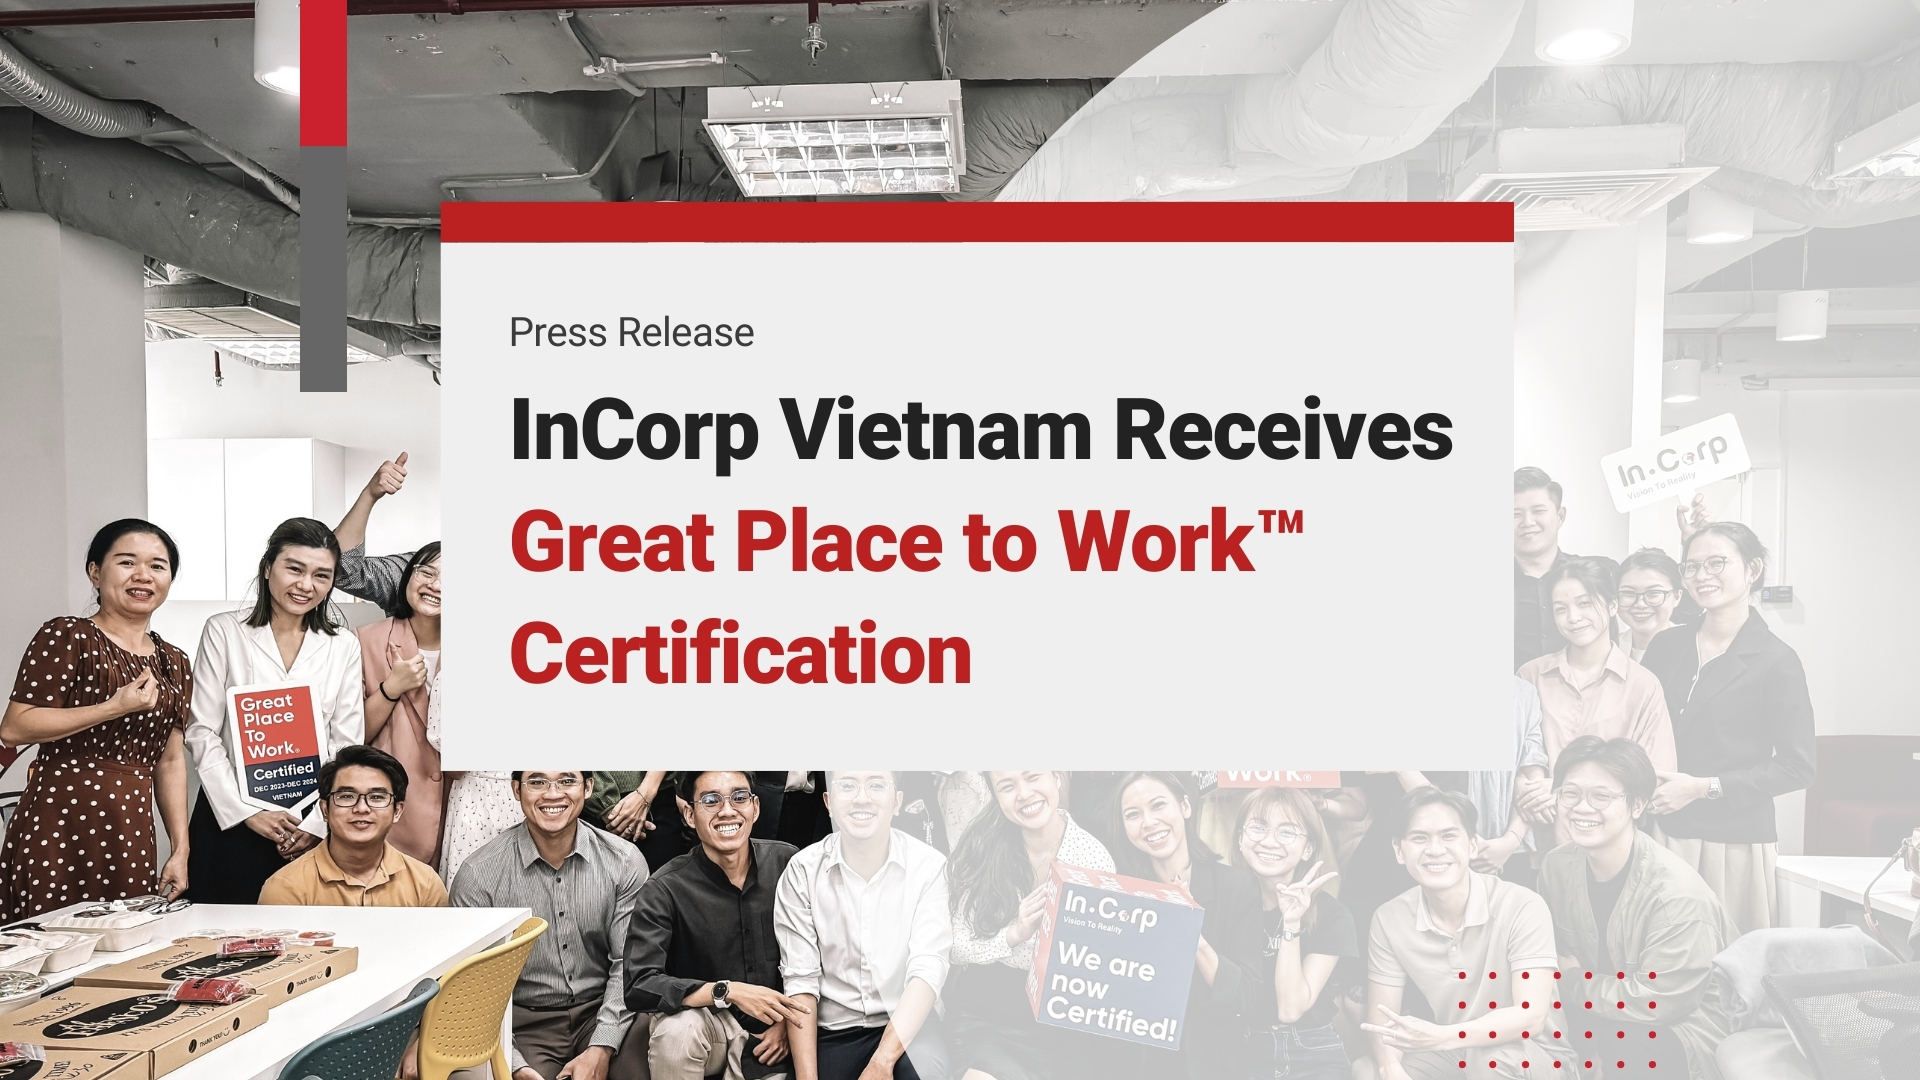 InCorp Vietnam Receives Great Place to Work™ Certification